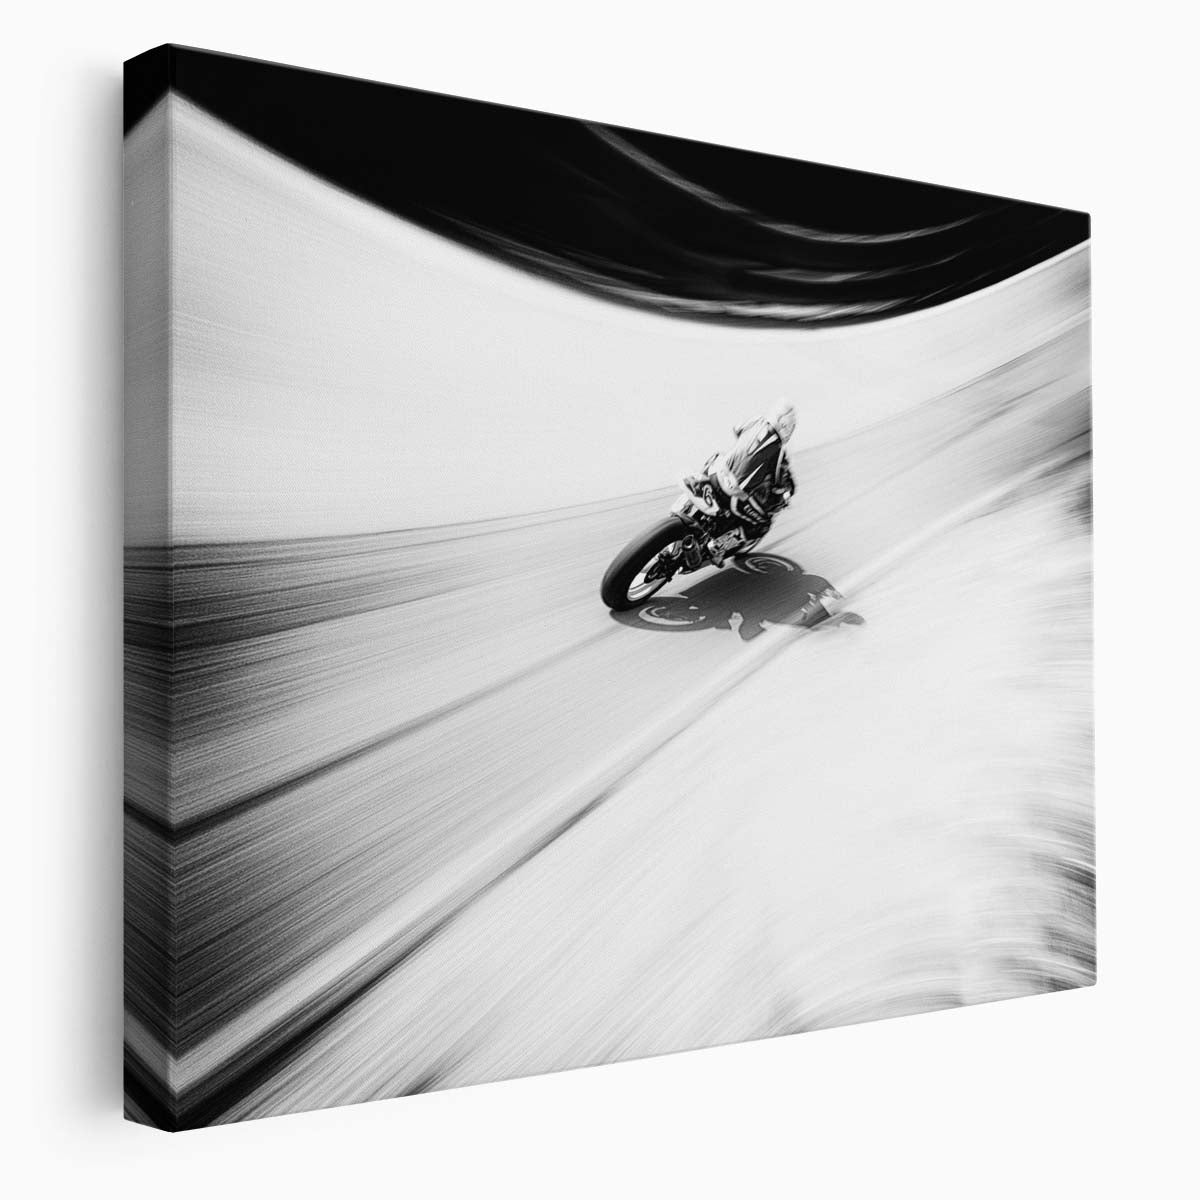 Speeding Motorcycles Race, Monochrome Action Wall Art by Luxuriance Designs. Made in USA.